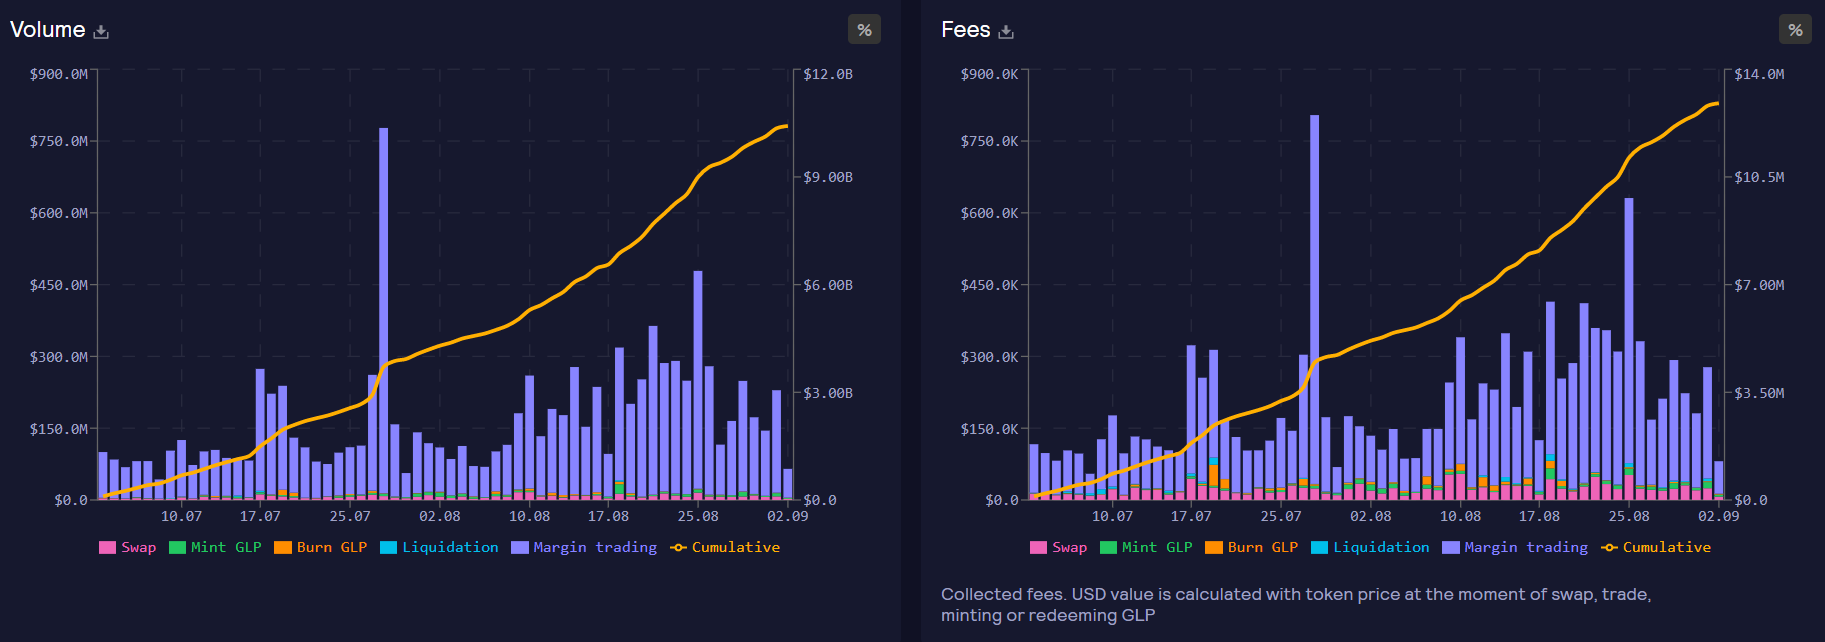 GMX volume and fees graph